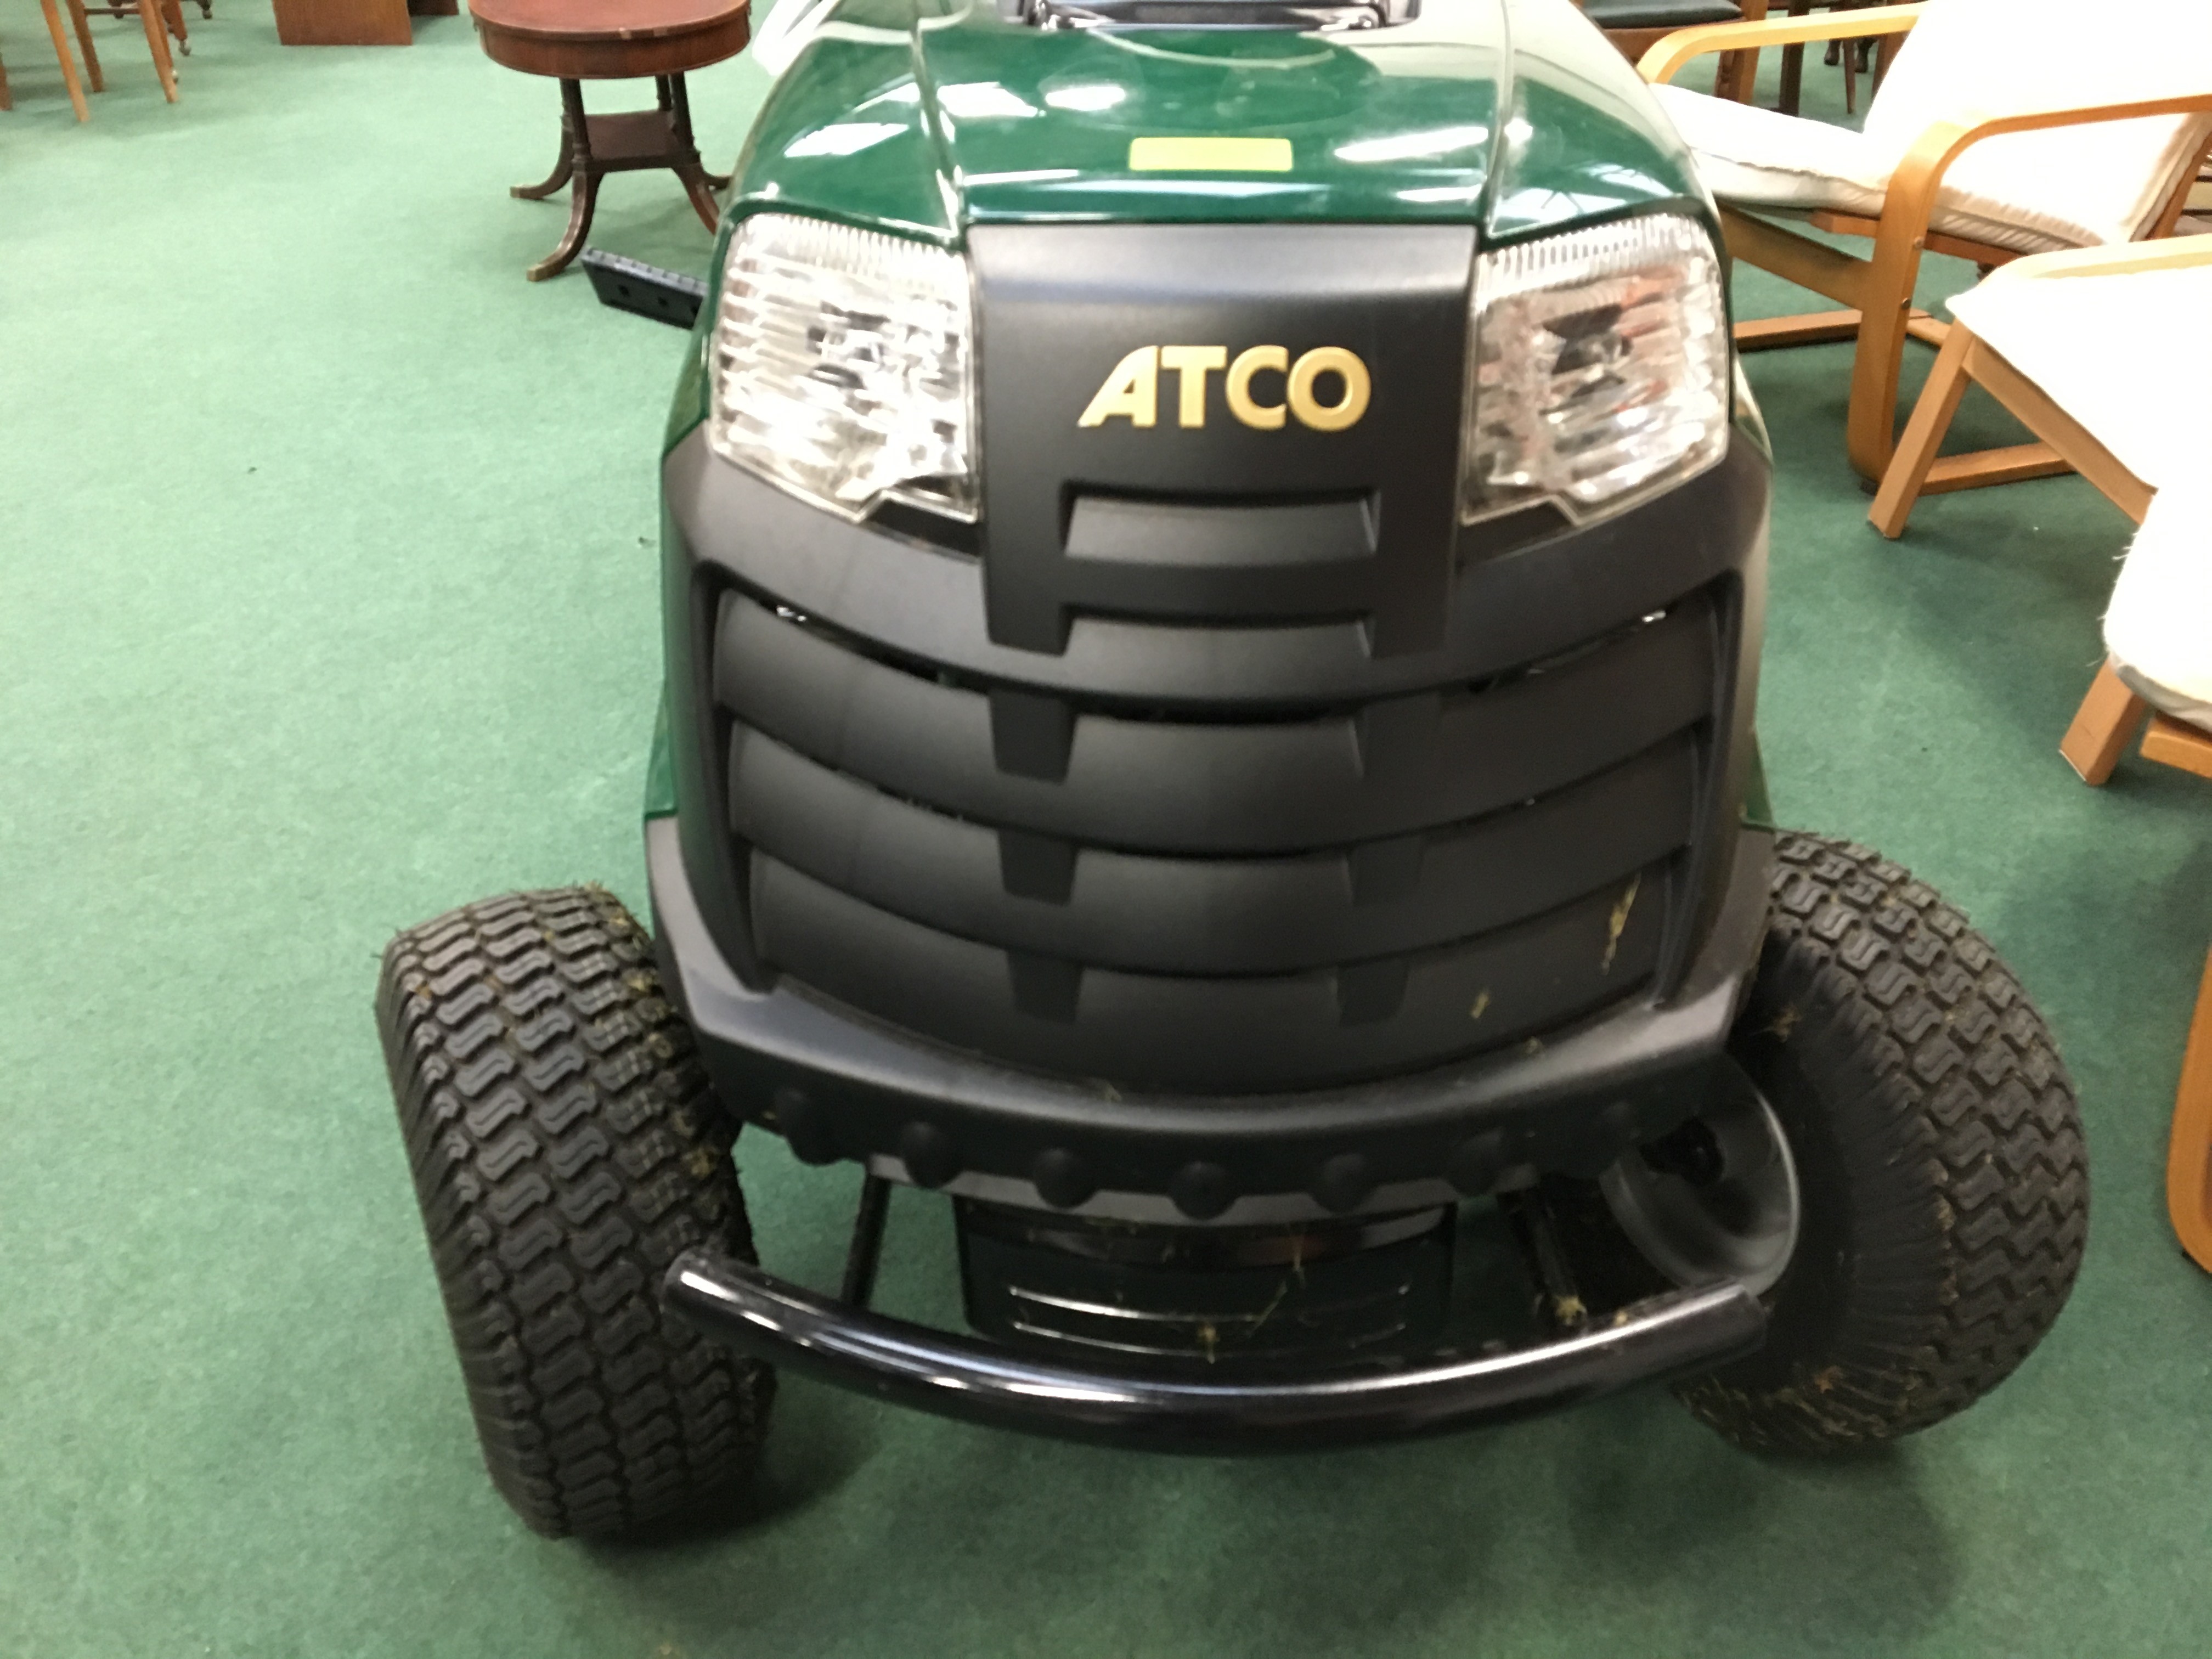 A Atco G T 30H petrol driven sit on mower powered by Briggs & Stratton. - Image 2 of 6